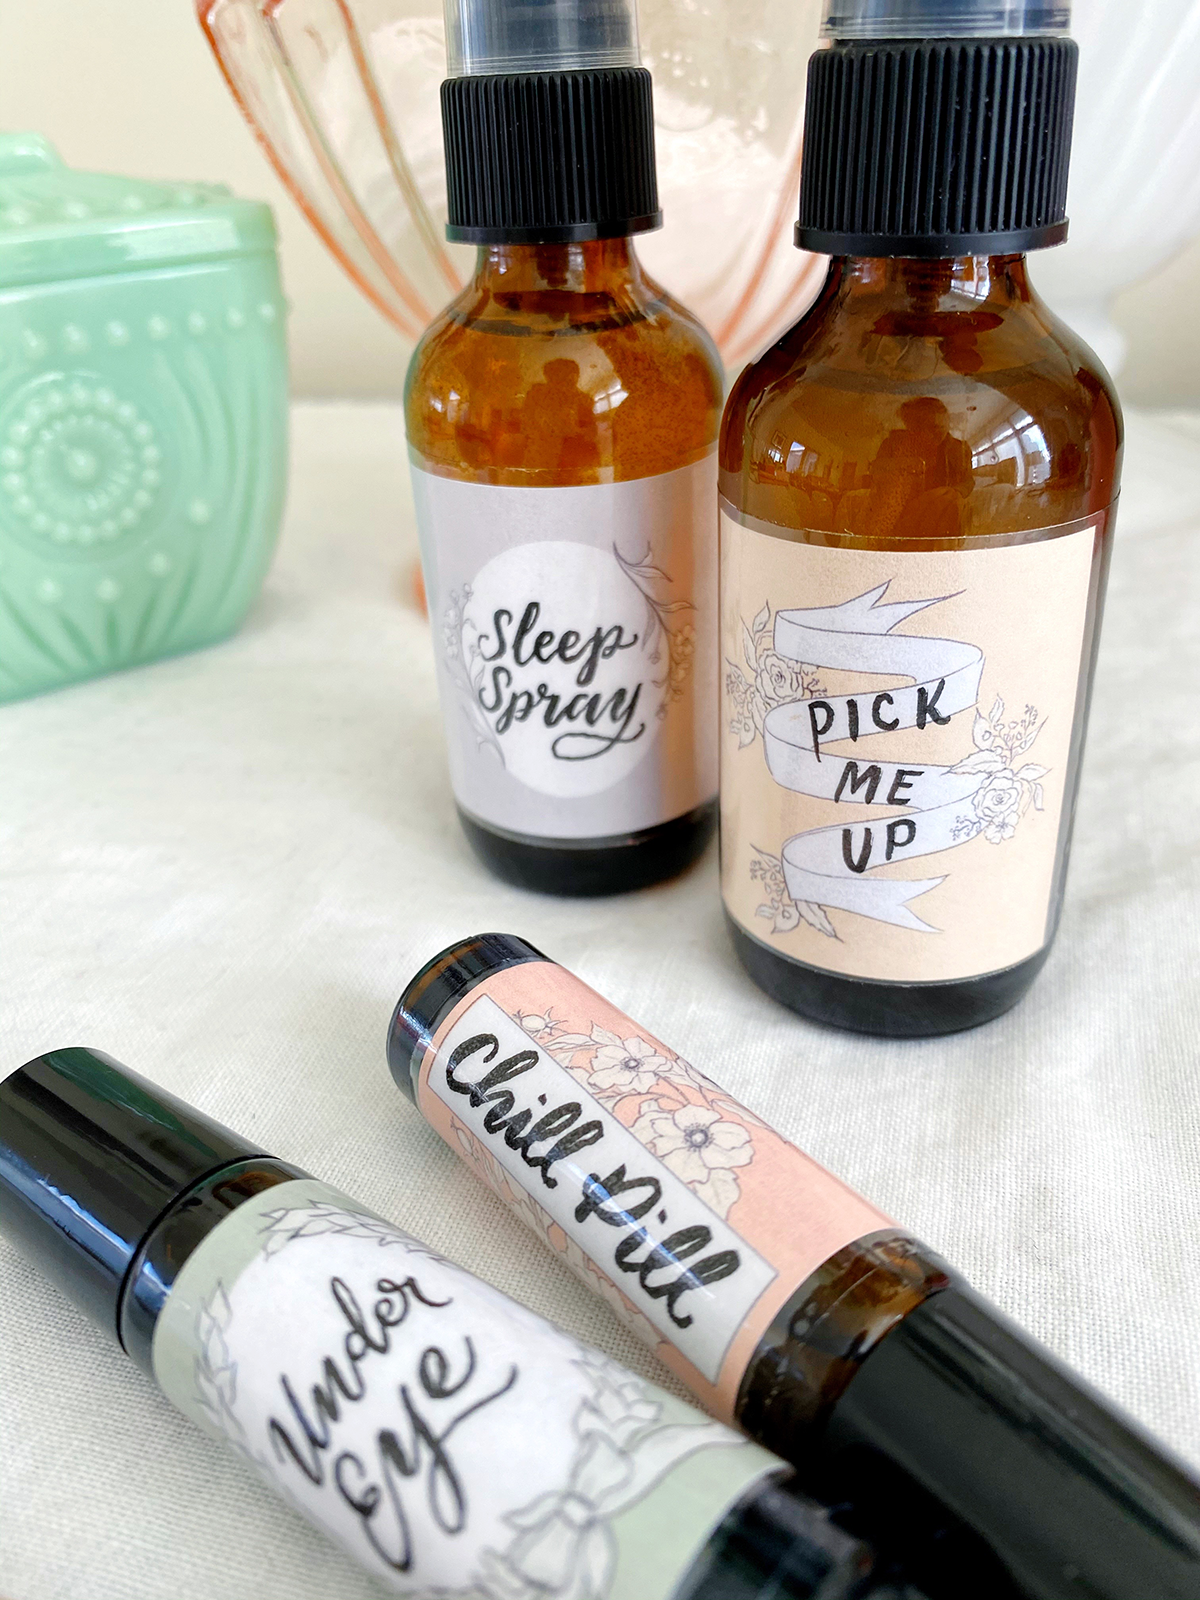 Free Printable RollOn and Spray Bottle Labels for Essential Oils